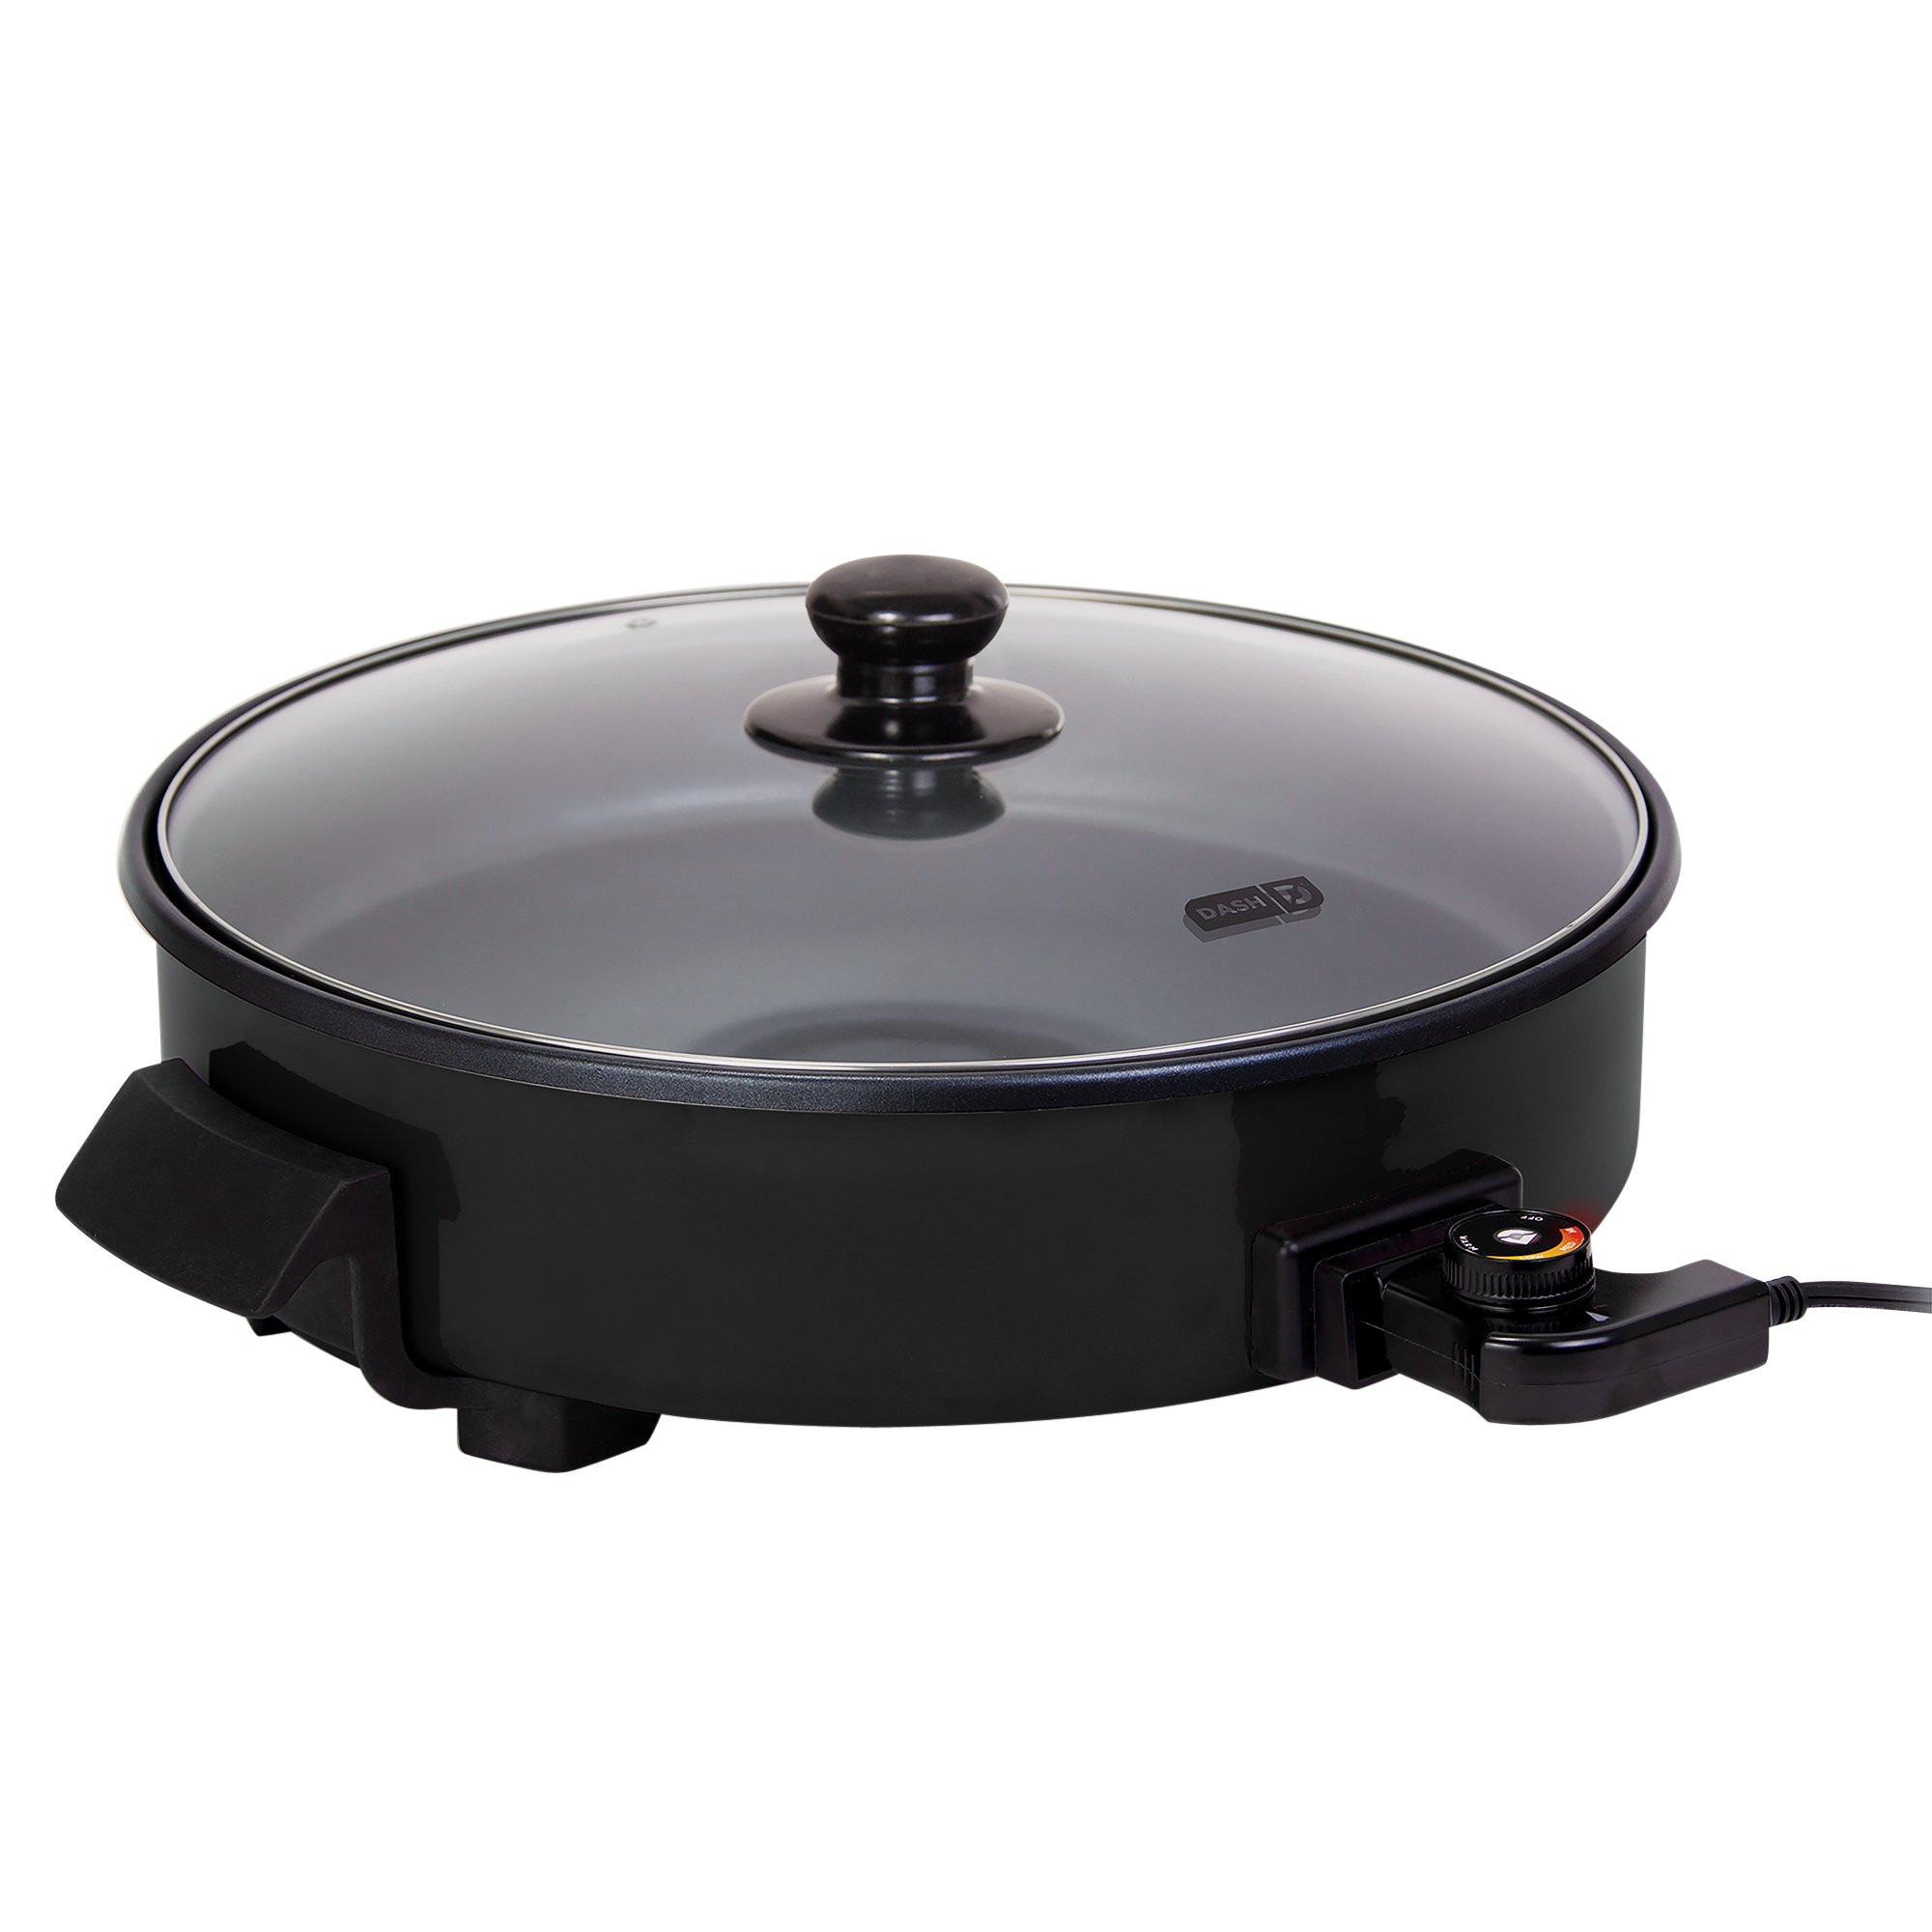 Continental 6 inch Electric Skillet Black, 6 Inch - Harris Teeter